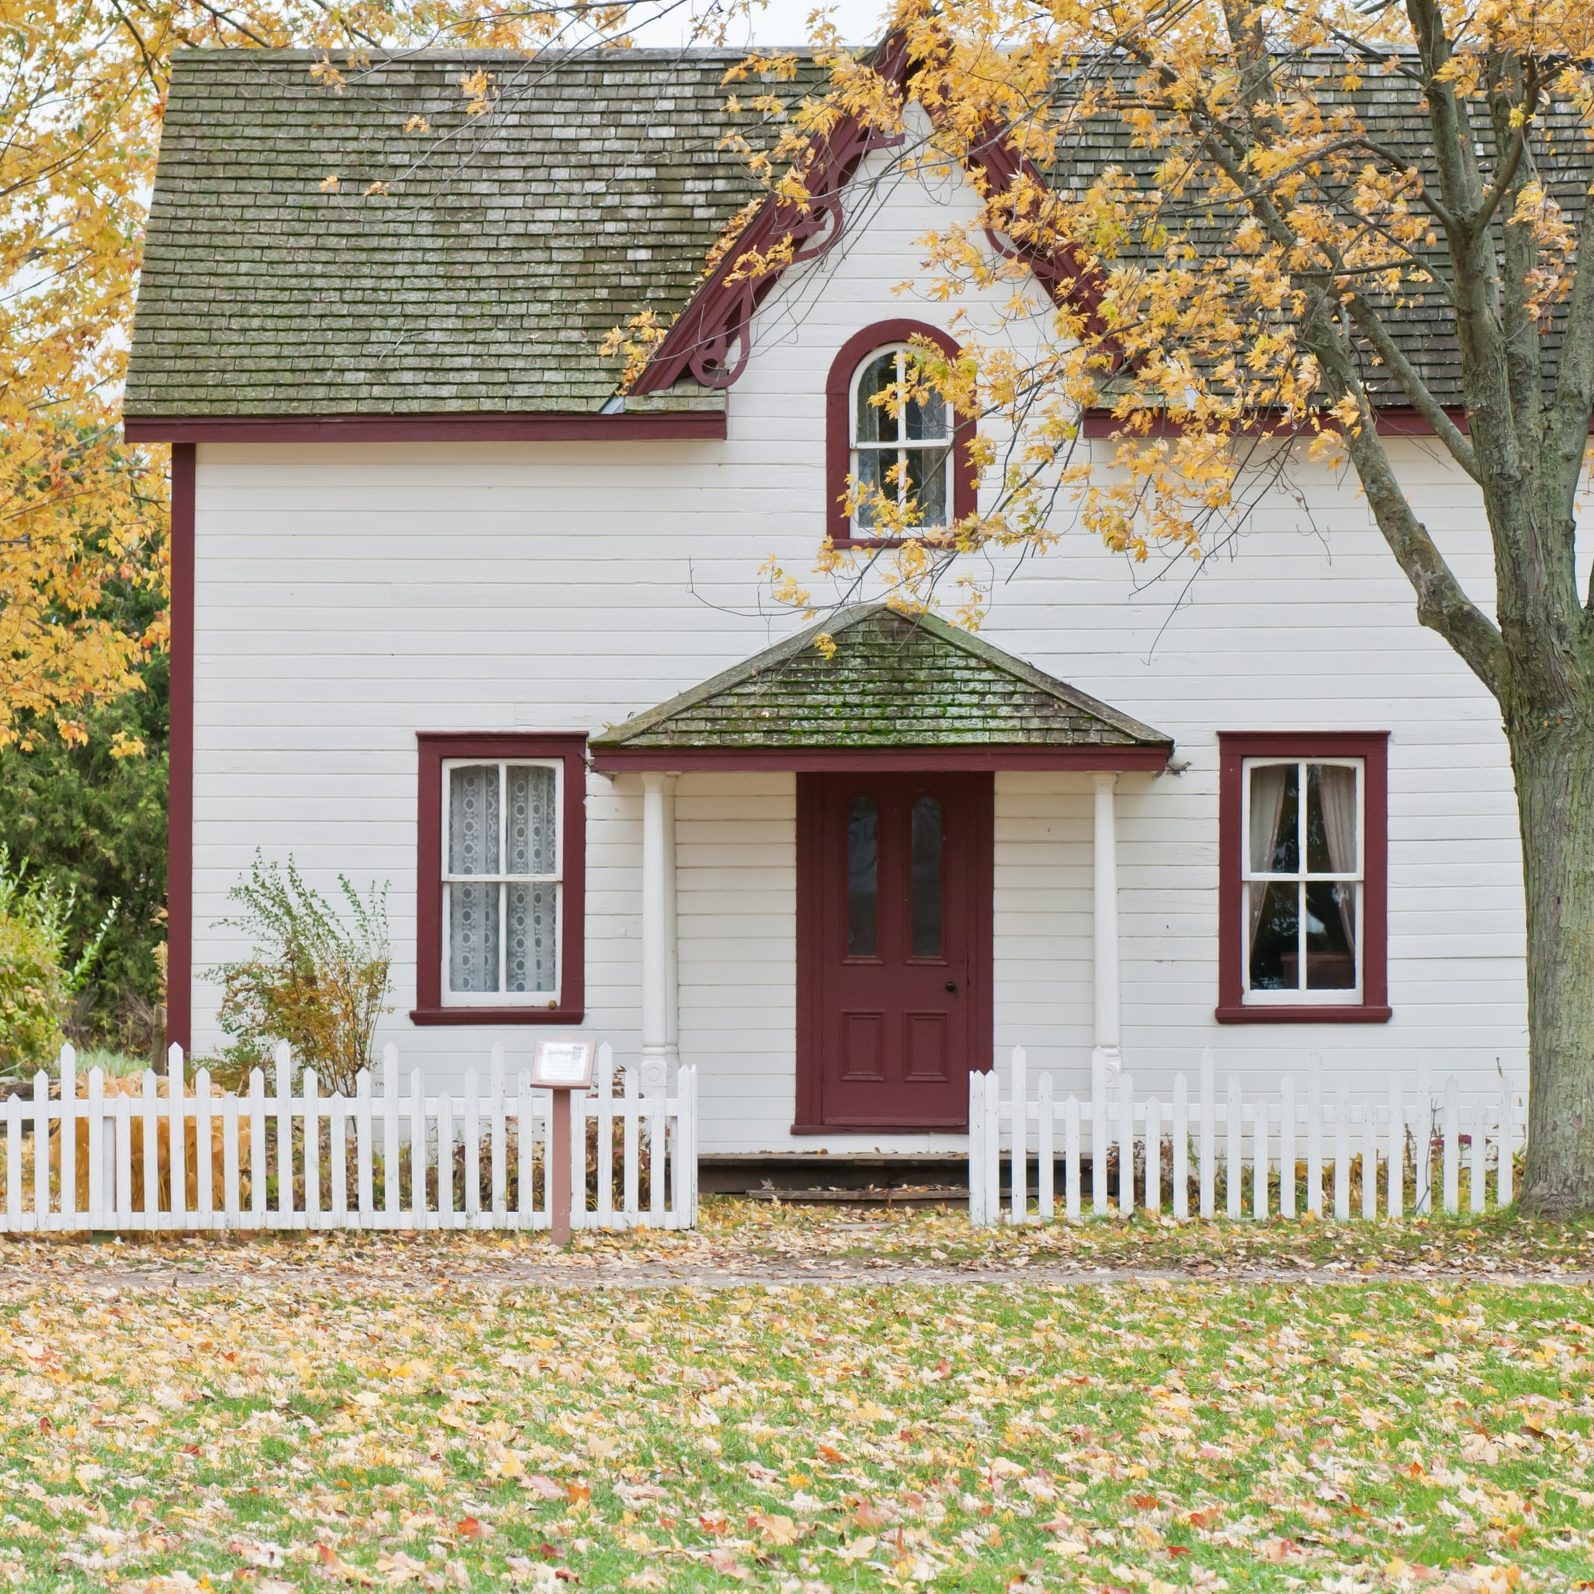 Photo of a modest house with leaves on the lawn 